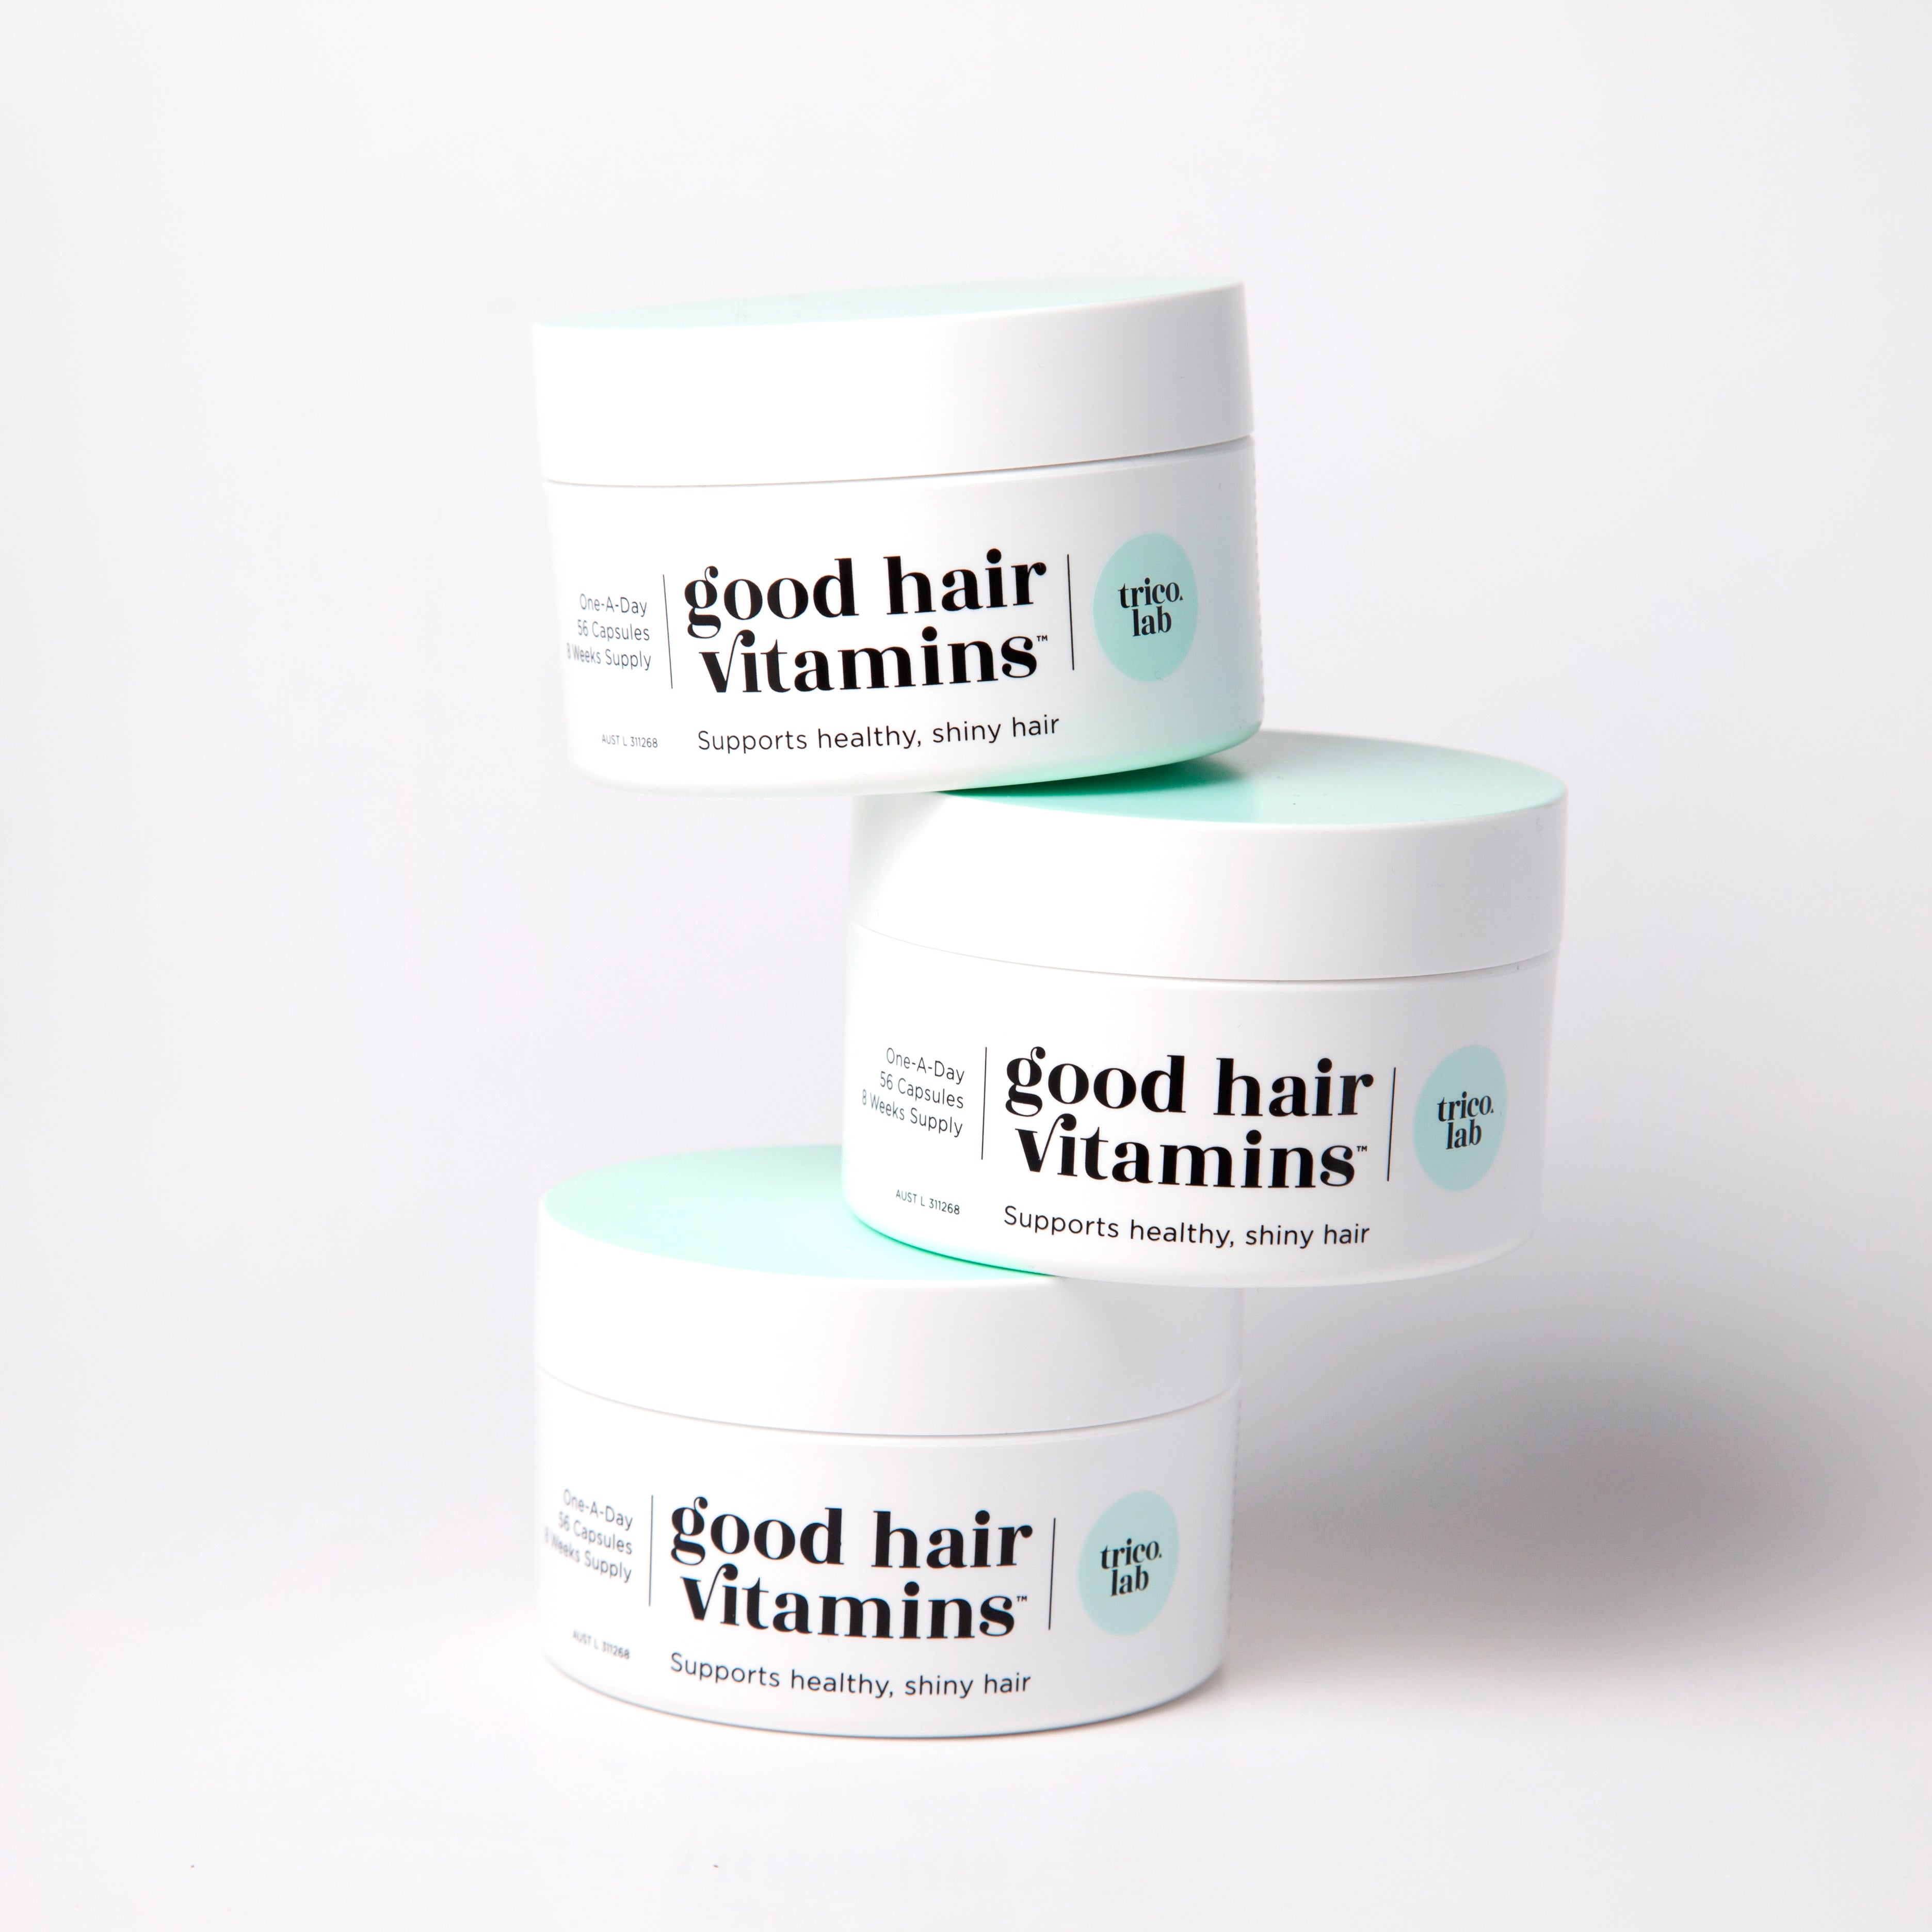 Good Hair Vitamins for dry and brittle hair, contain biotin & collagen